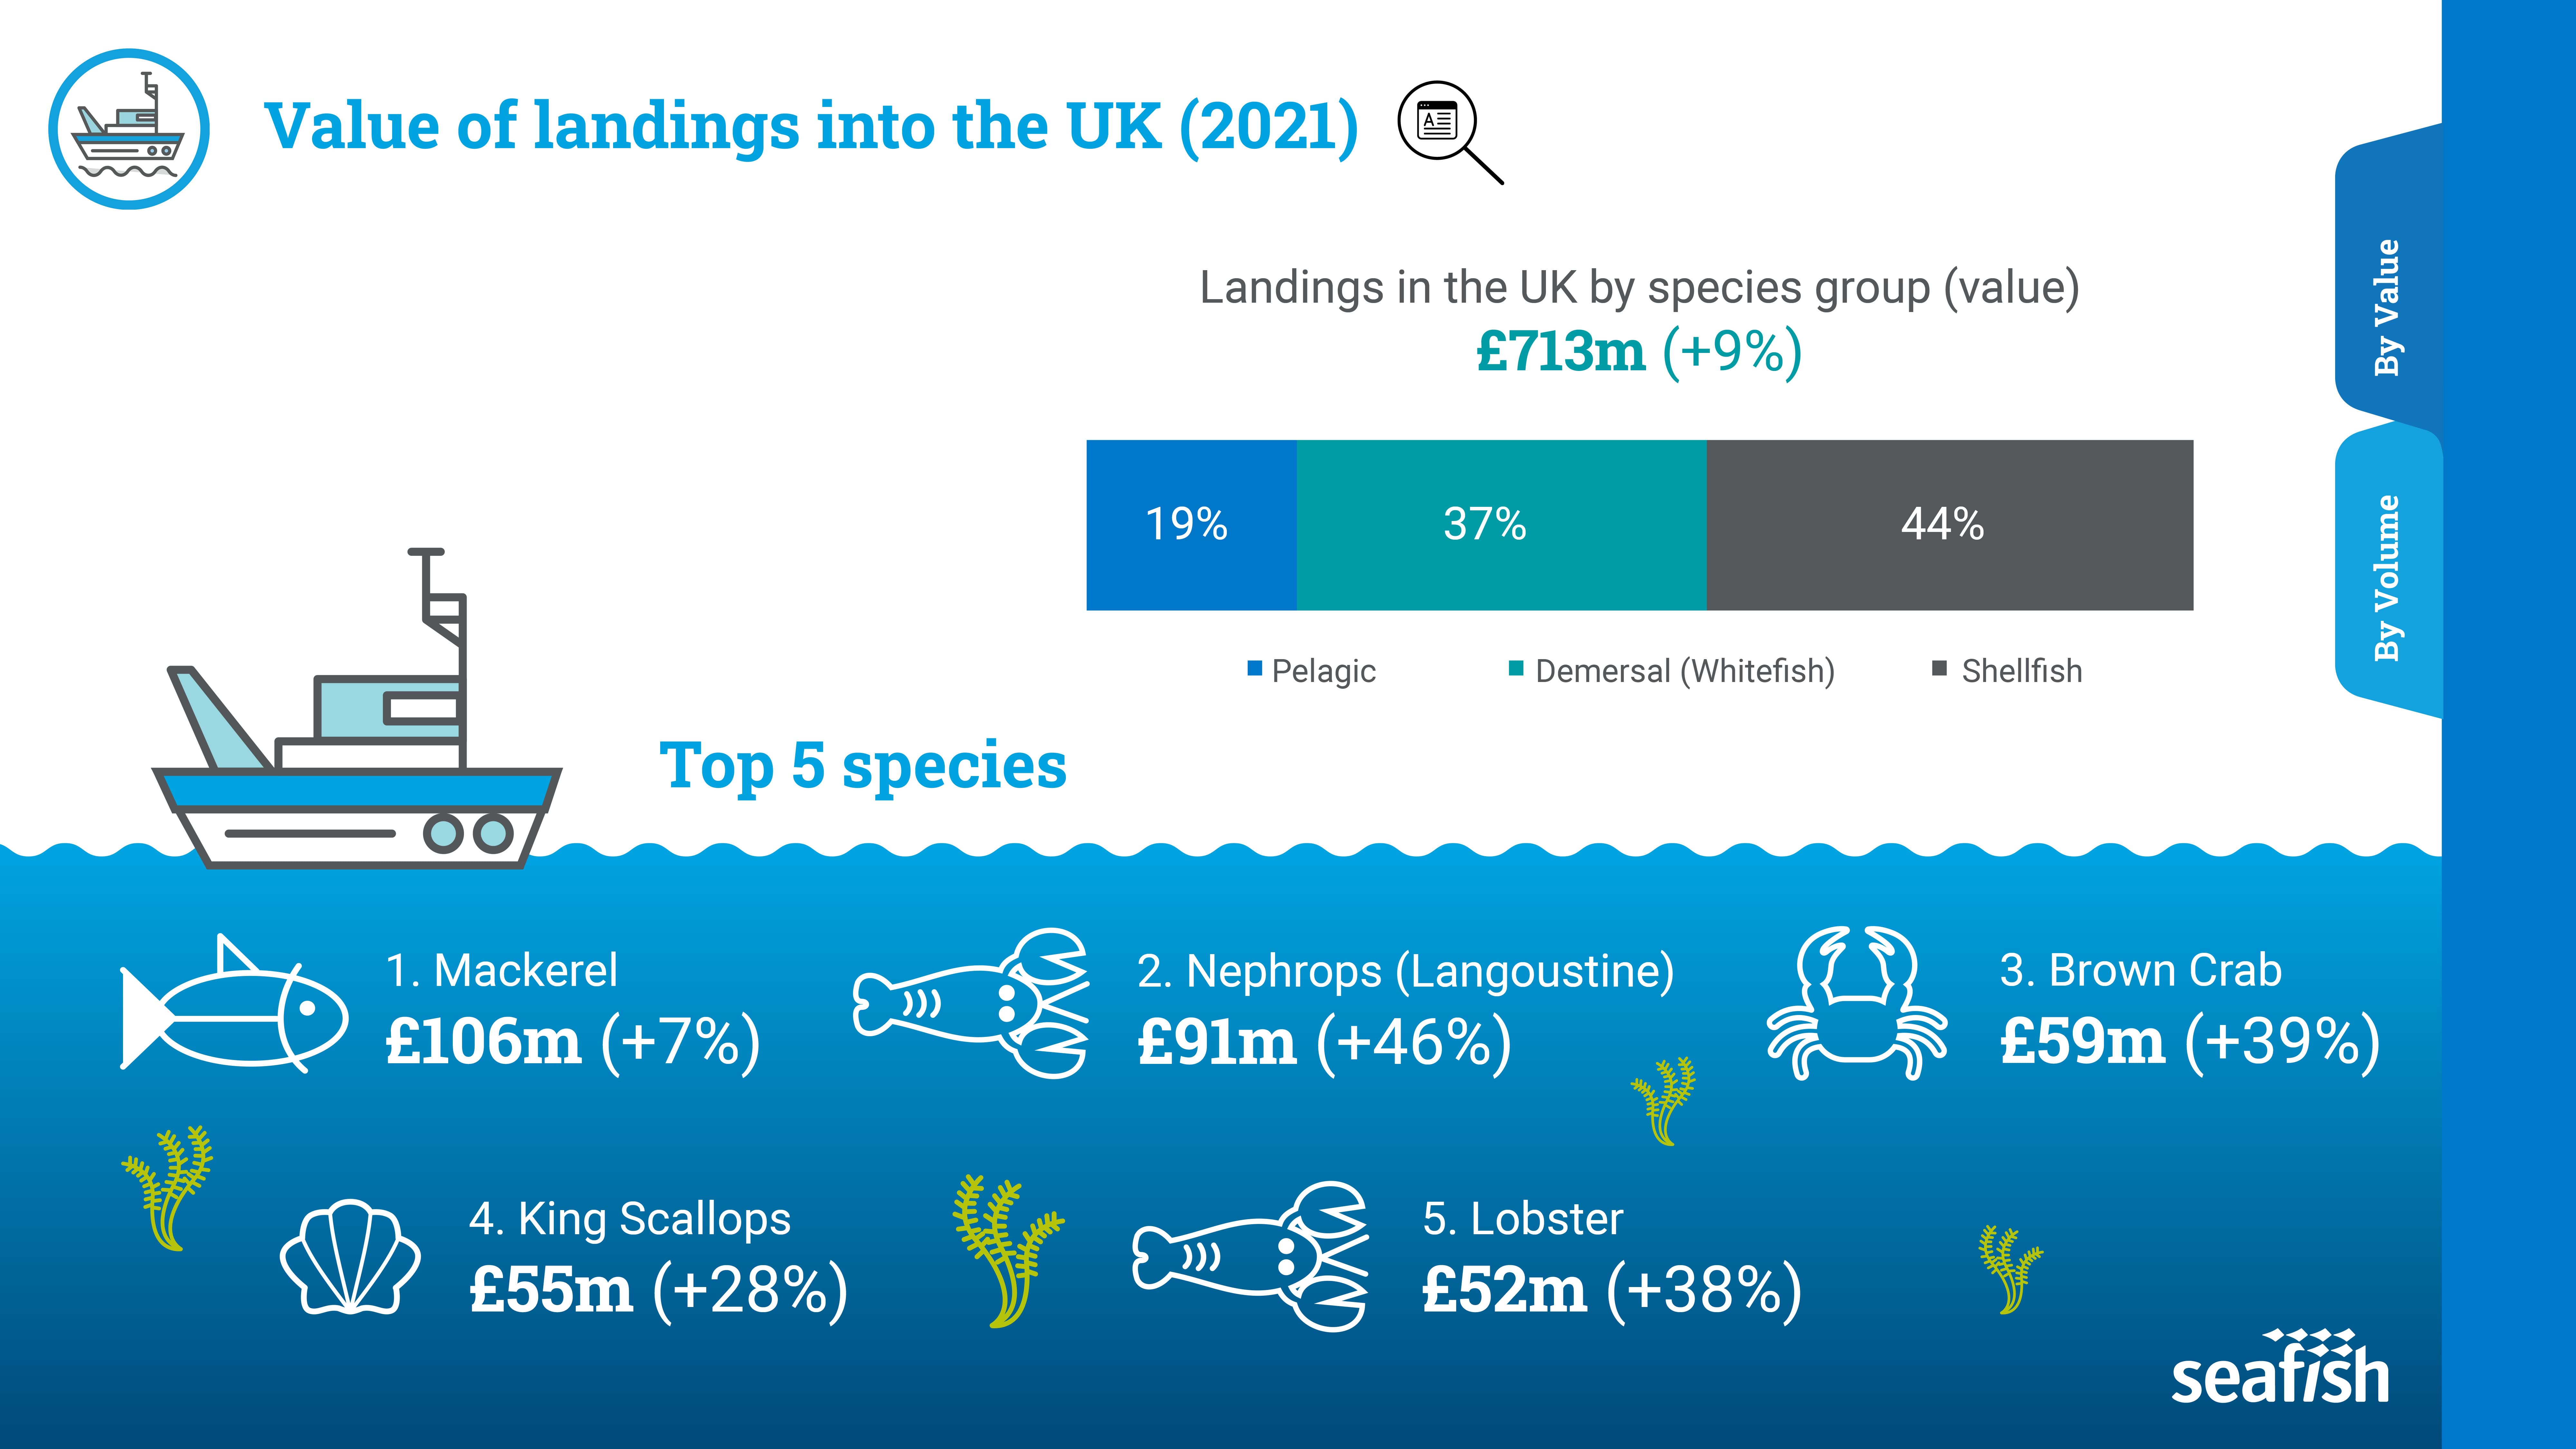 Infographic showing the value of landings into the UK (2021) of the top five species, Mackerel, Nephrops, Brown crab, Kind scallops and Lobster